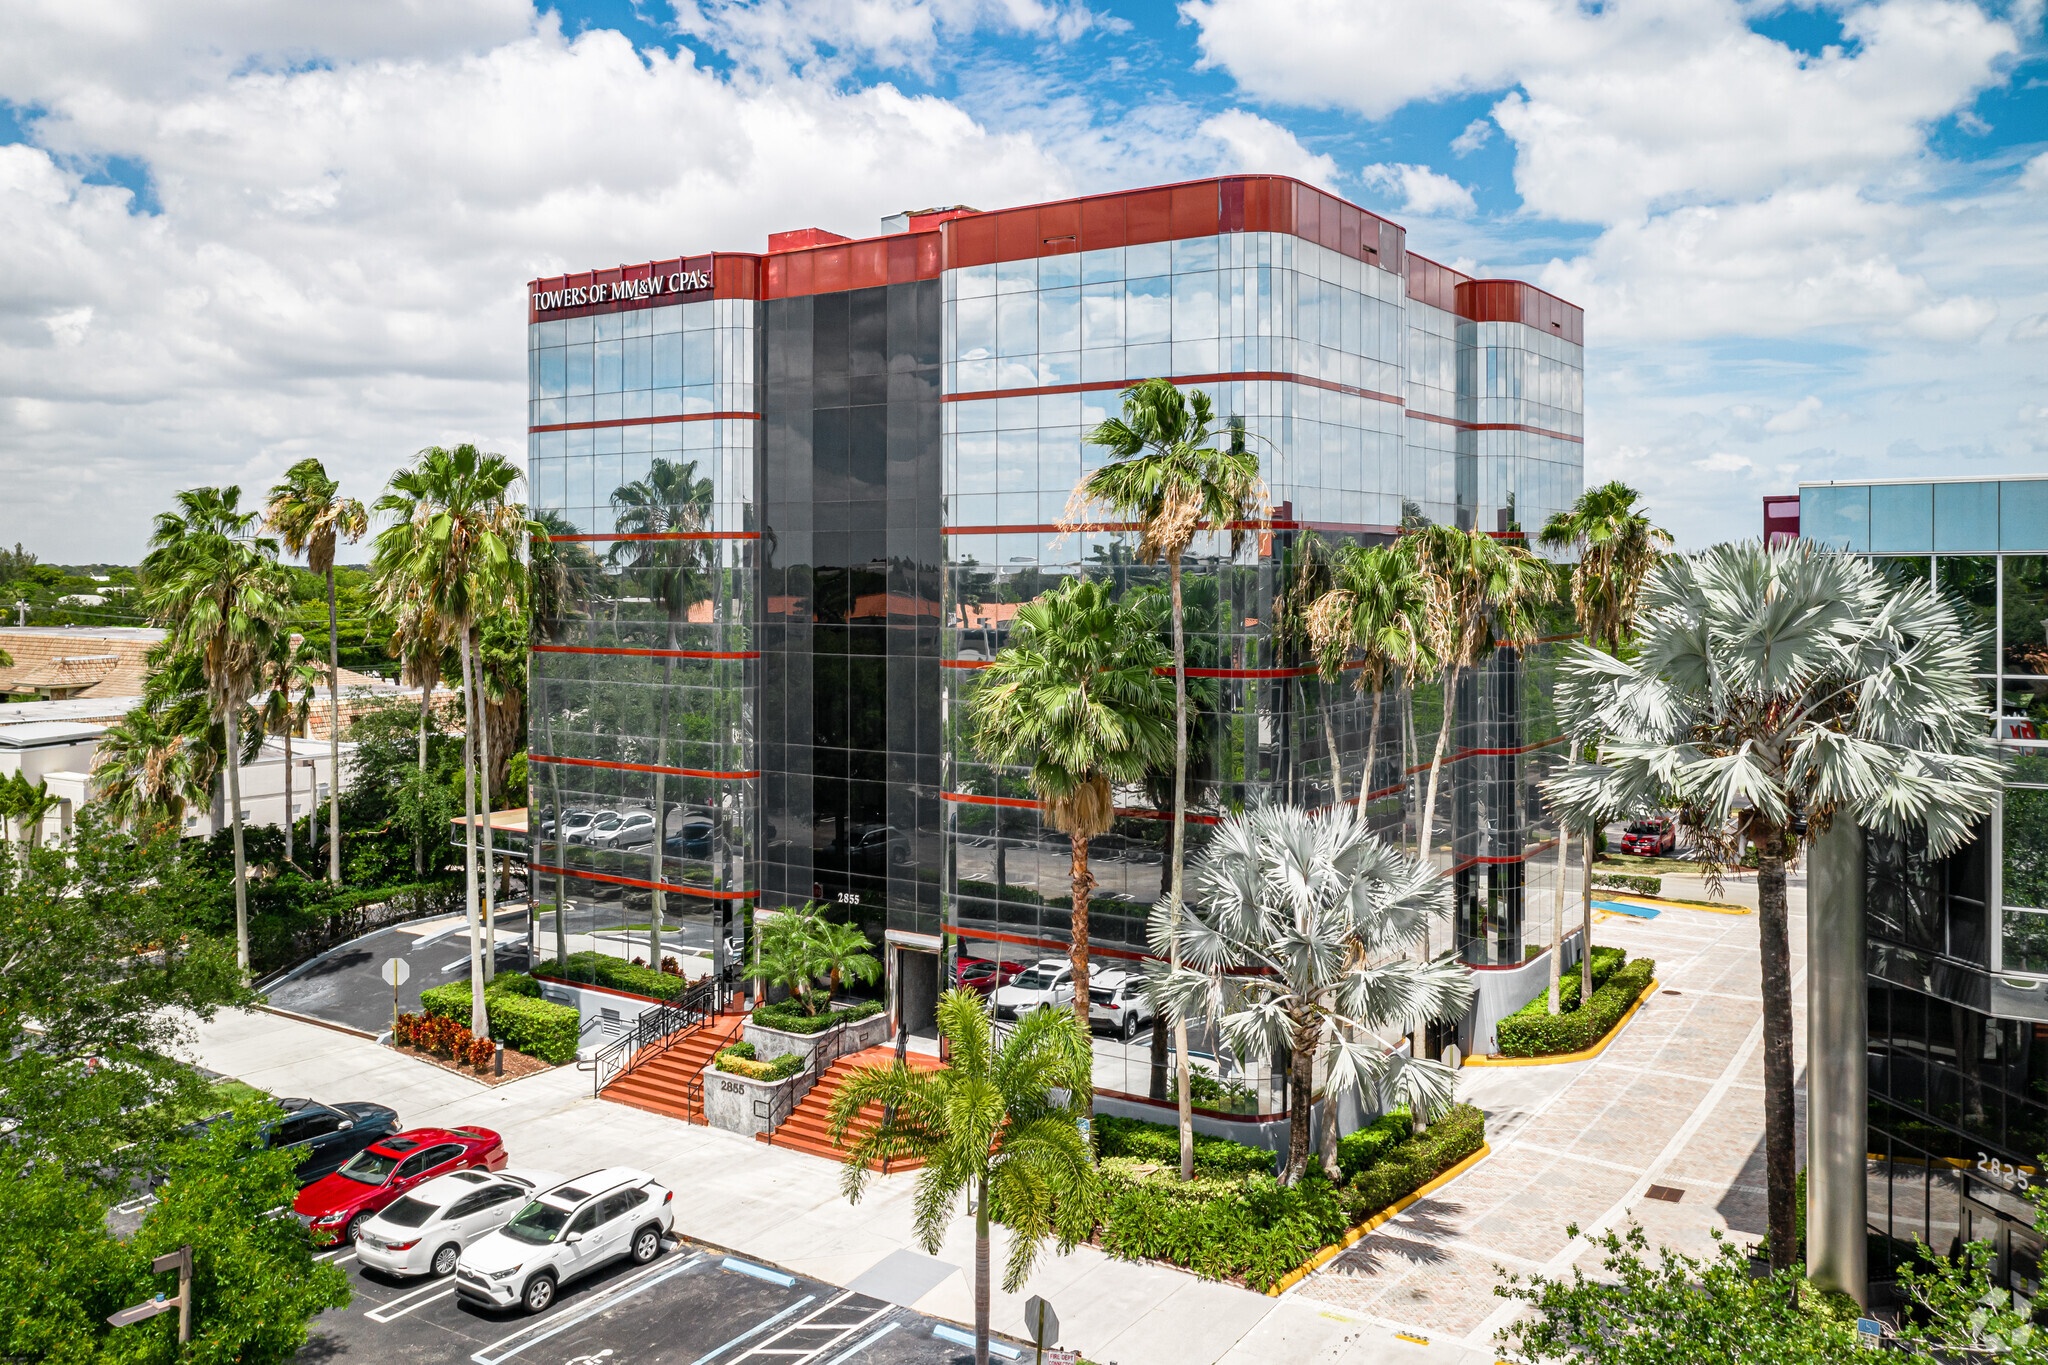  Picture of Office Building at 2855 North University Drive in Coral Springs Florida